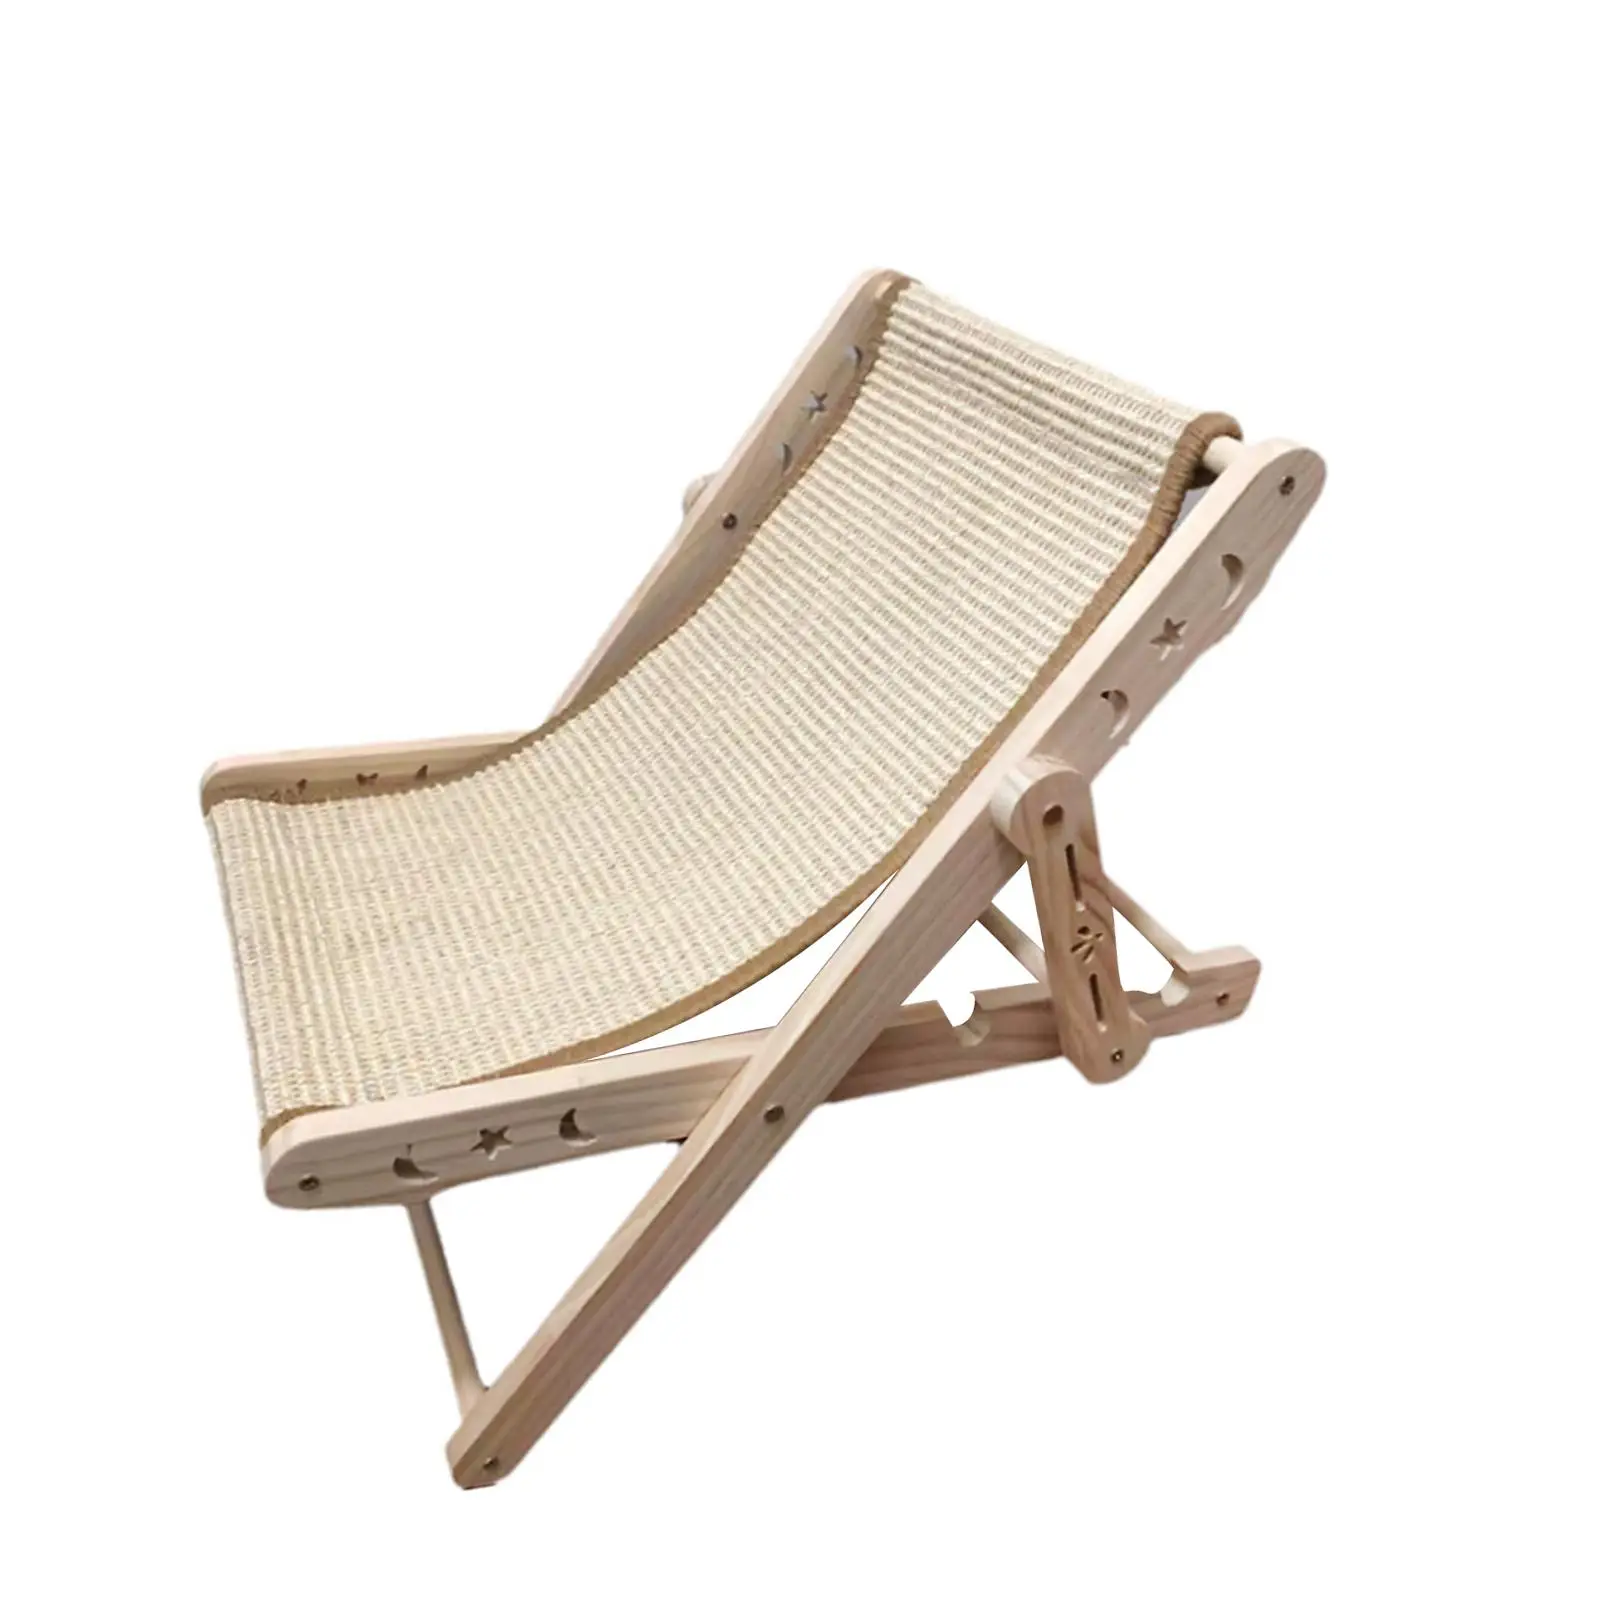 Cat Lounge Chair Modern Furniture Comfortable Sleeping Cats Raised Bed Cat Hammock Bed for Puppy Small Animal Bunny Dogs Rabbit